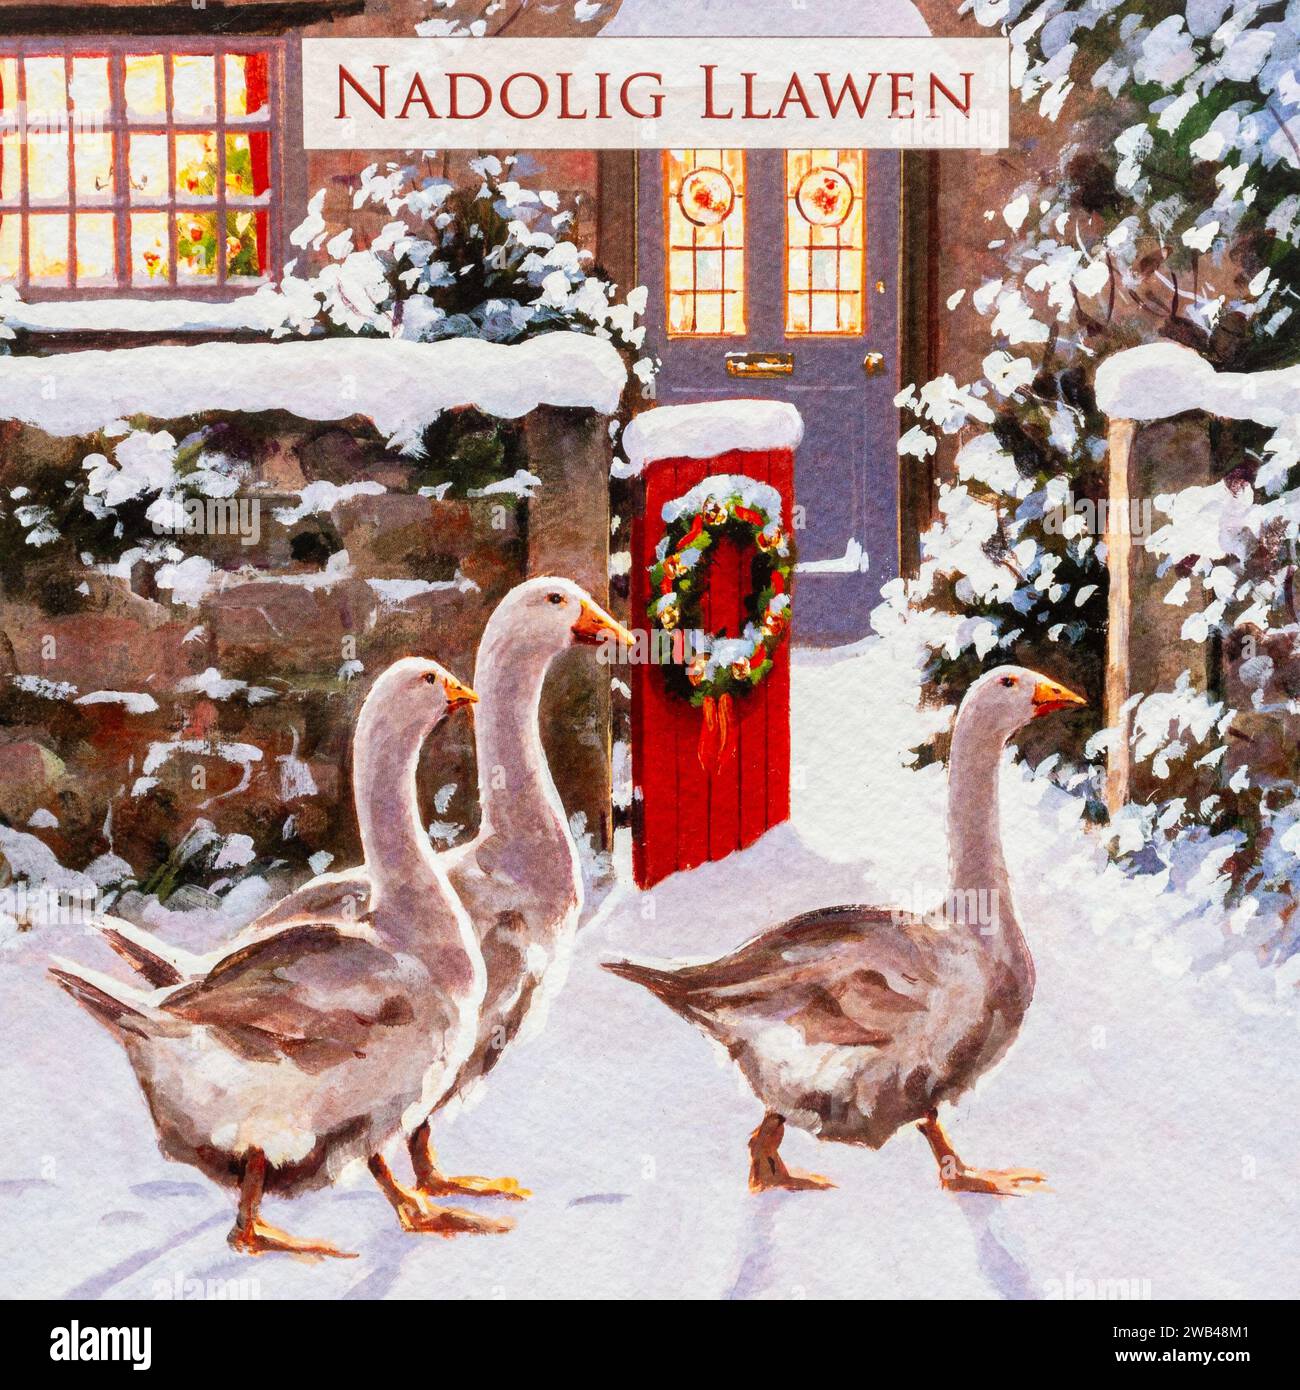 Nadolig Llawen, Welsh language greeting meaning Merry Christmas on a Christmas card, Wales, UK Stock Photo